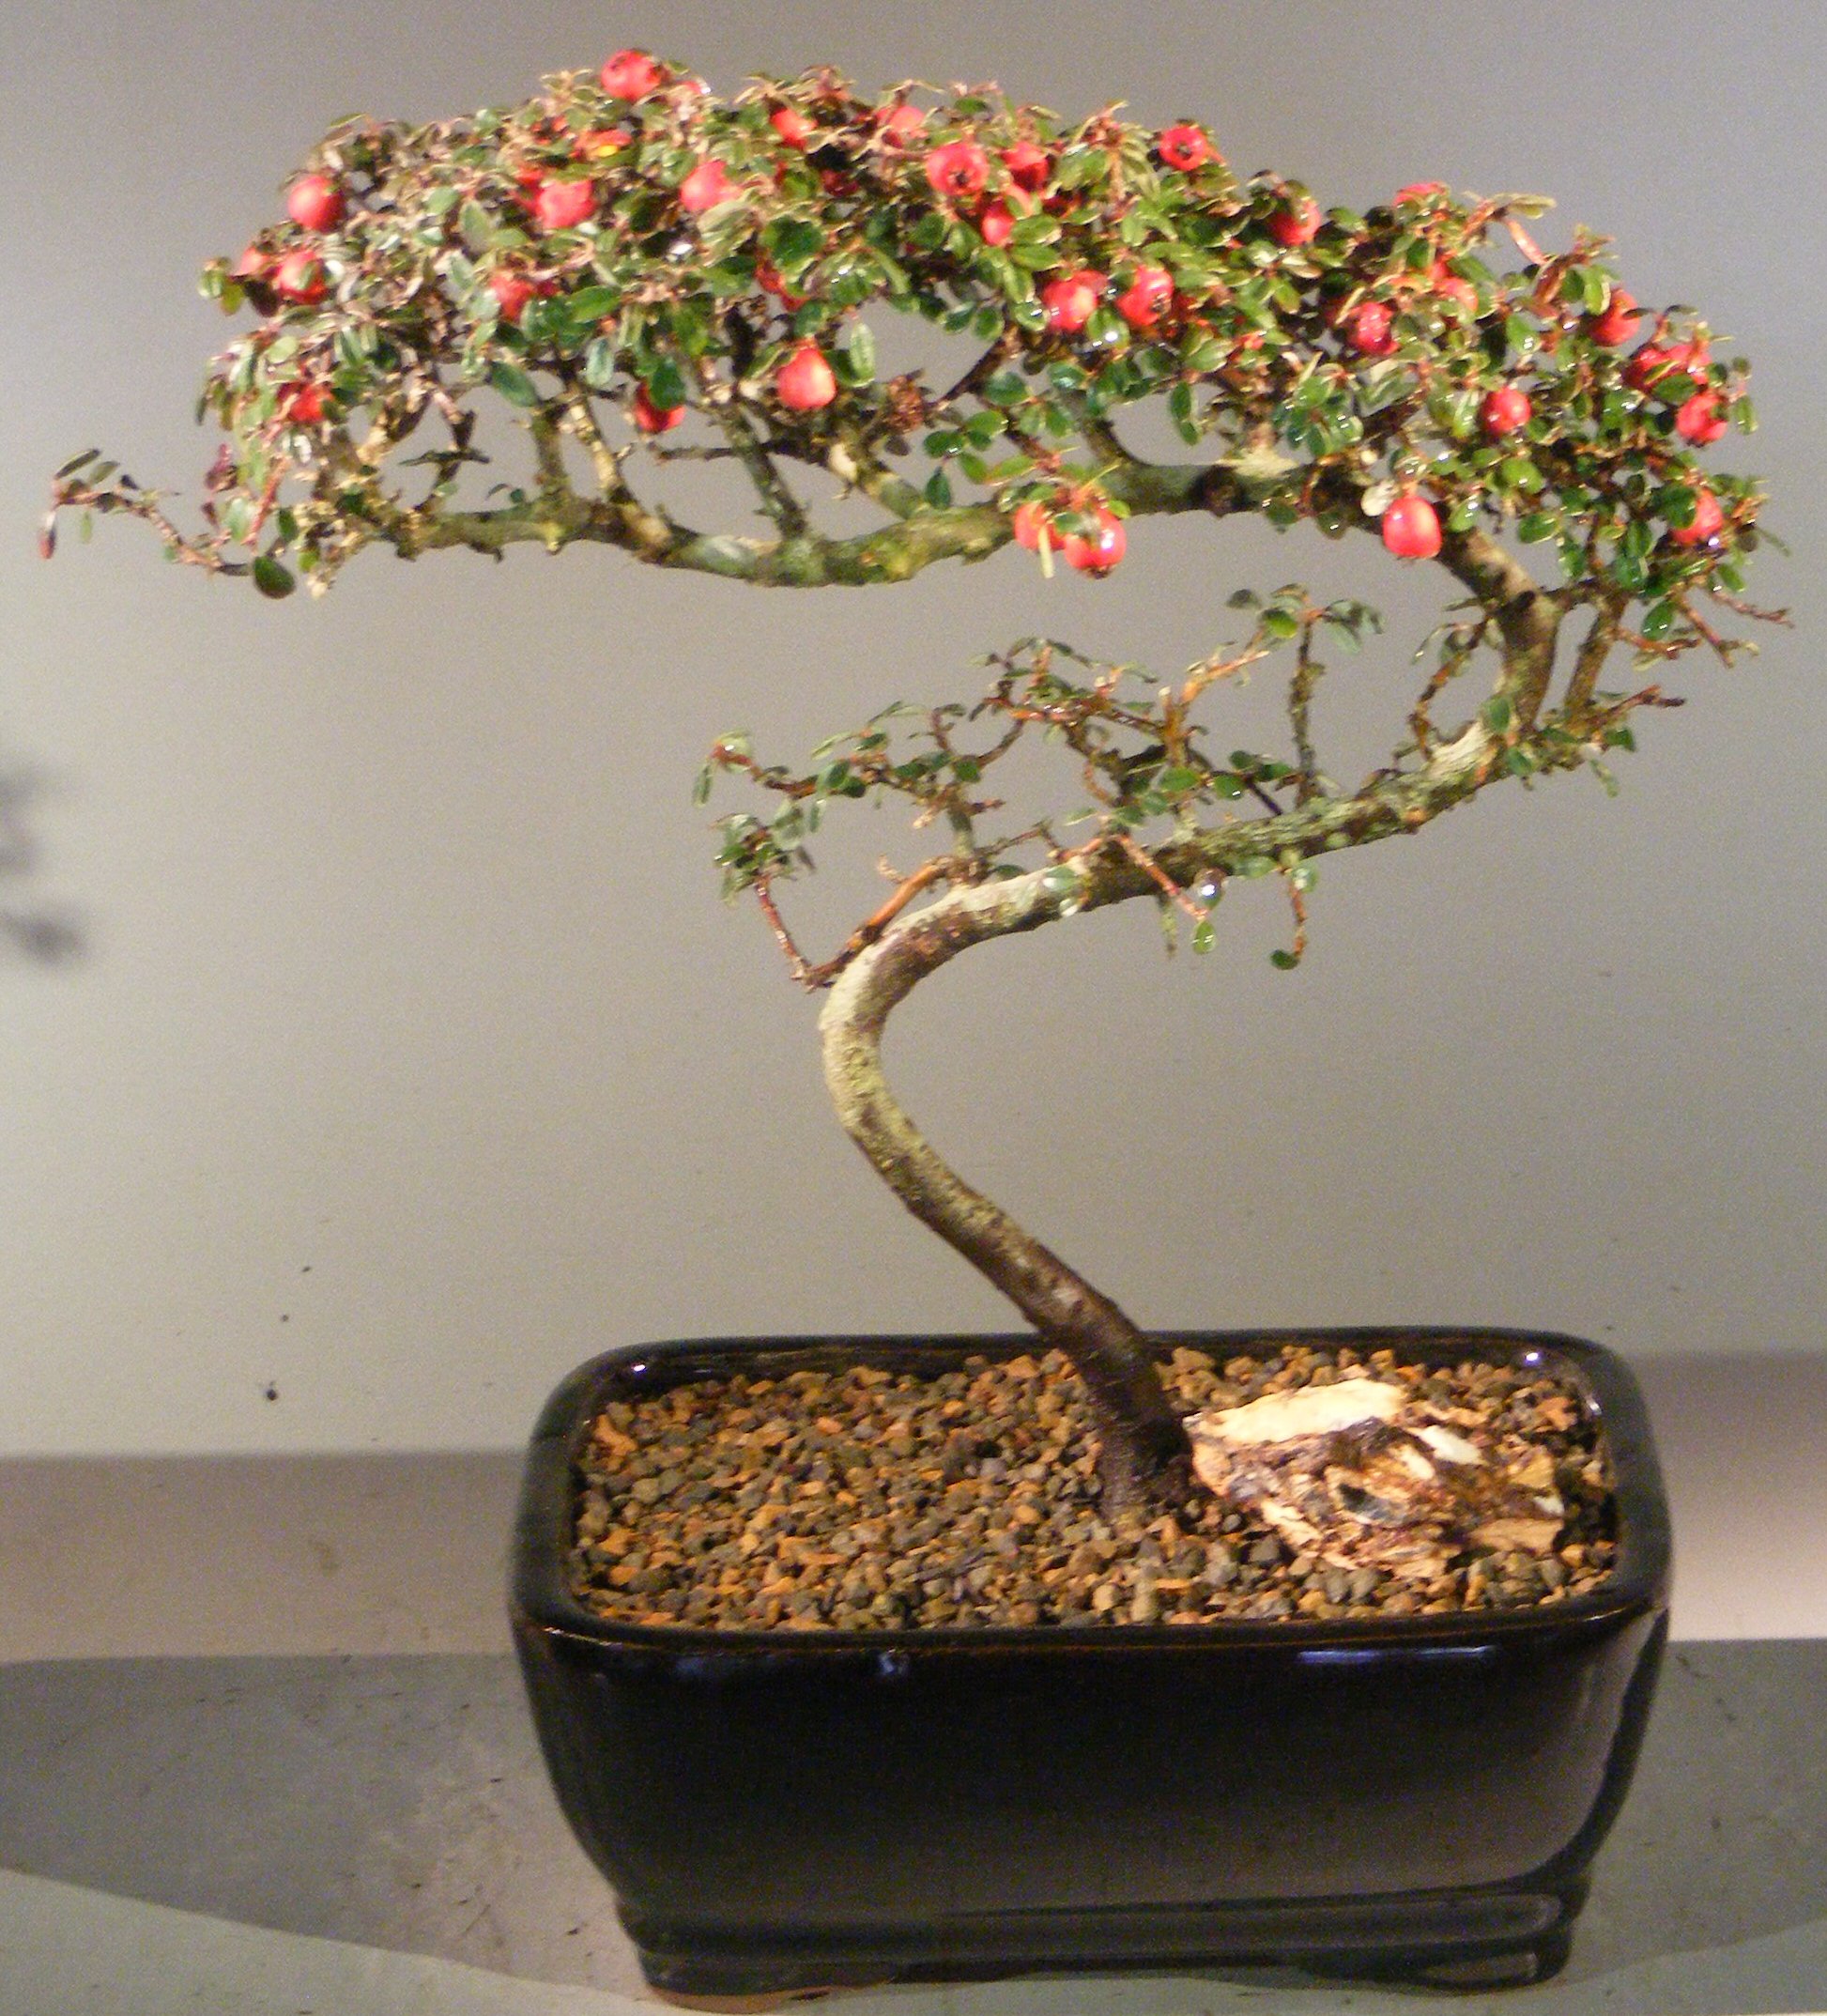 Flowering & Fruiting Evergreen Cotoneaster Bonsai TreeCurved Trunk Style(dammeri 'streibs findling') Image